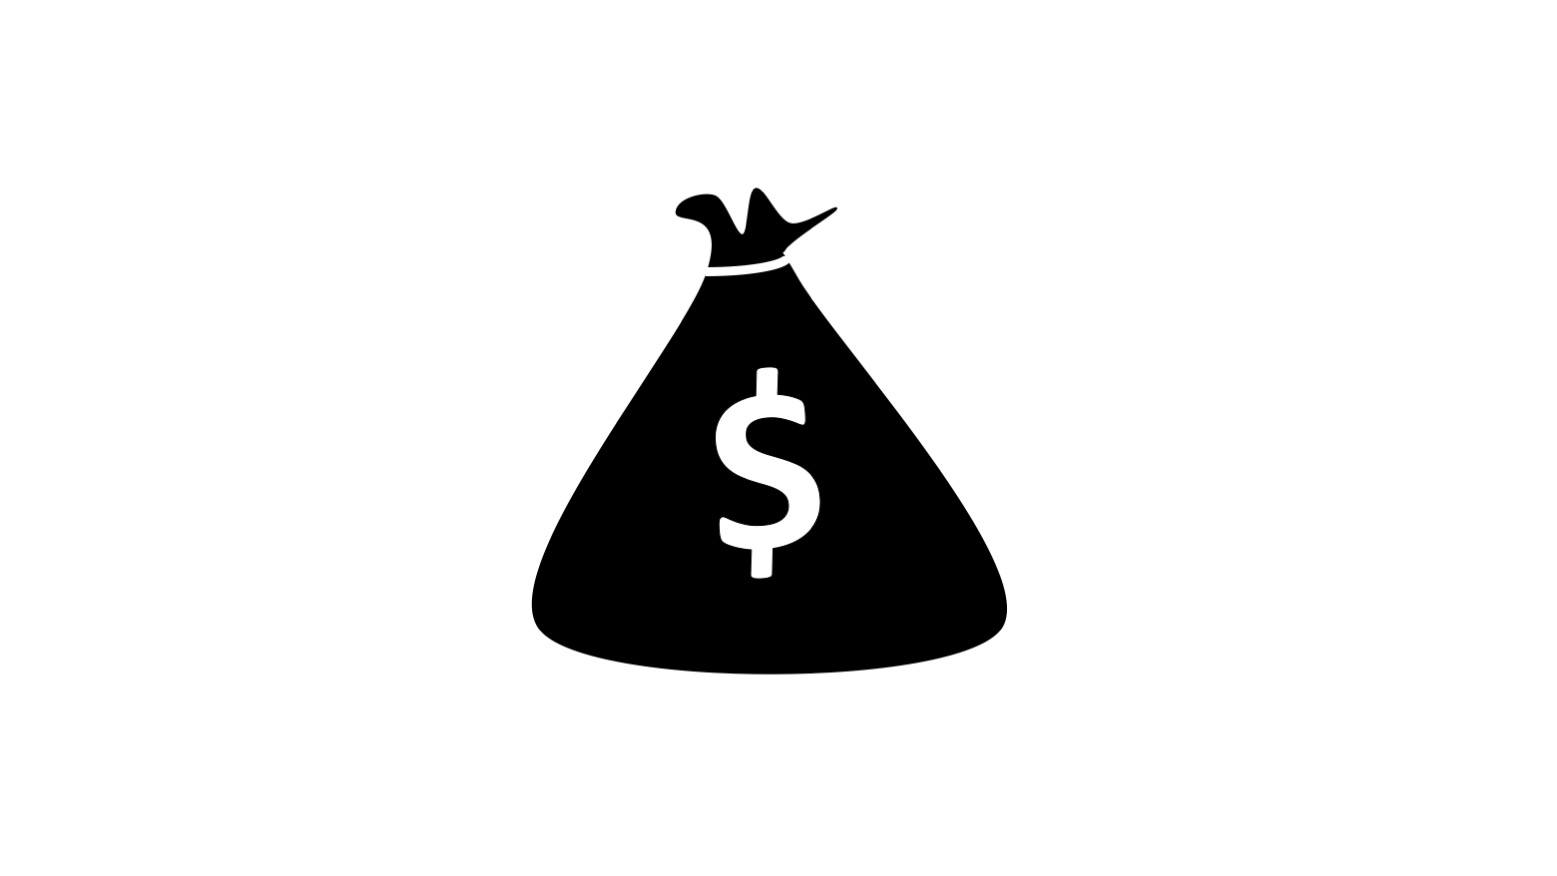 icon showing a bag with a dollar sign on it to signify Australia's wealth management sector